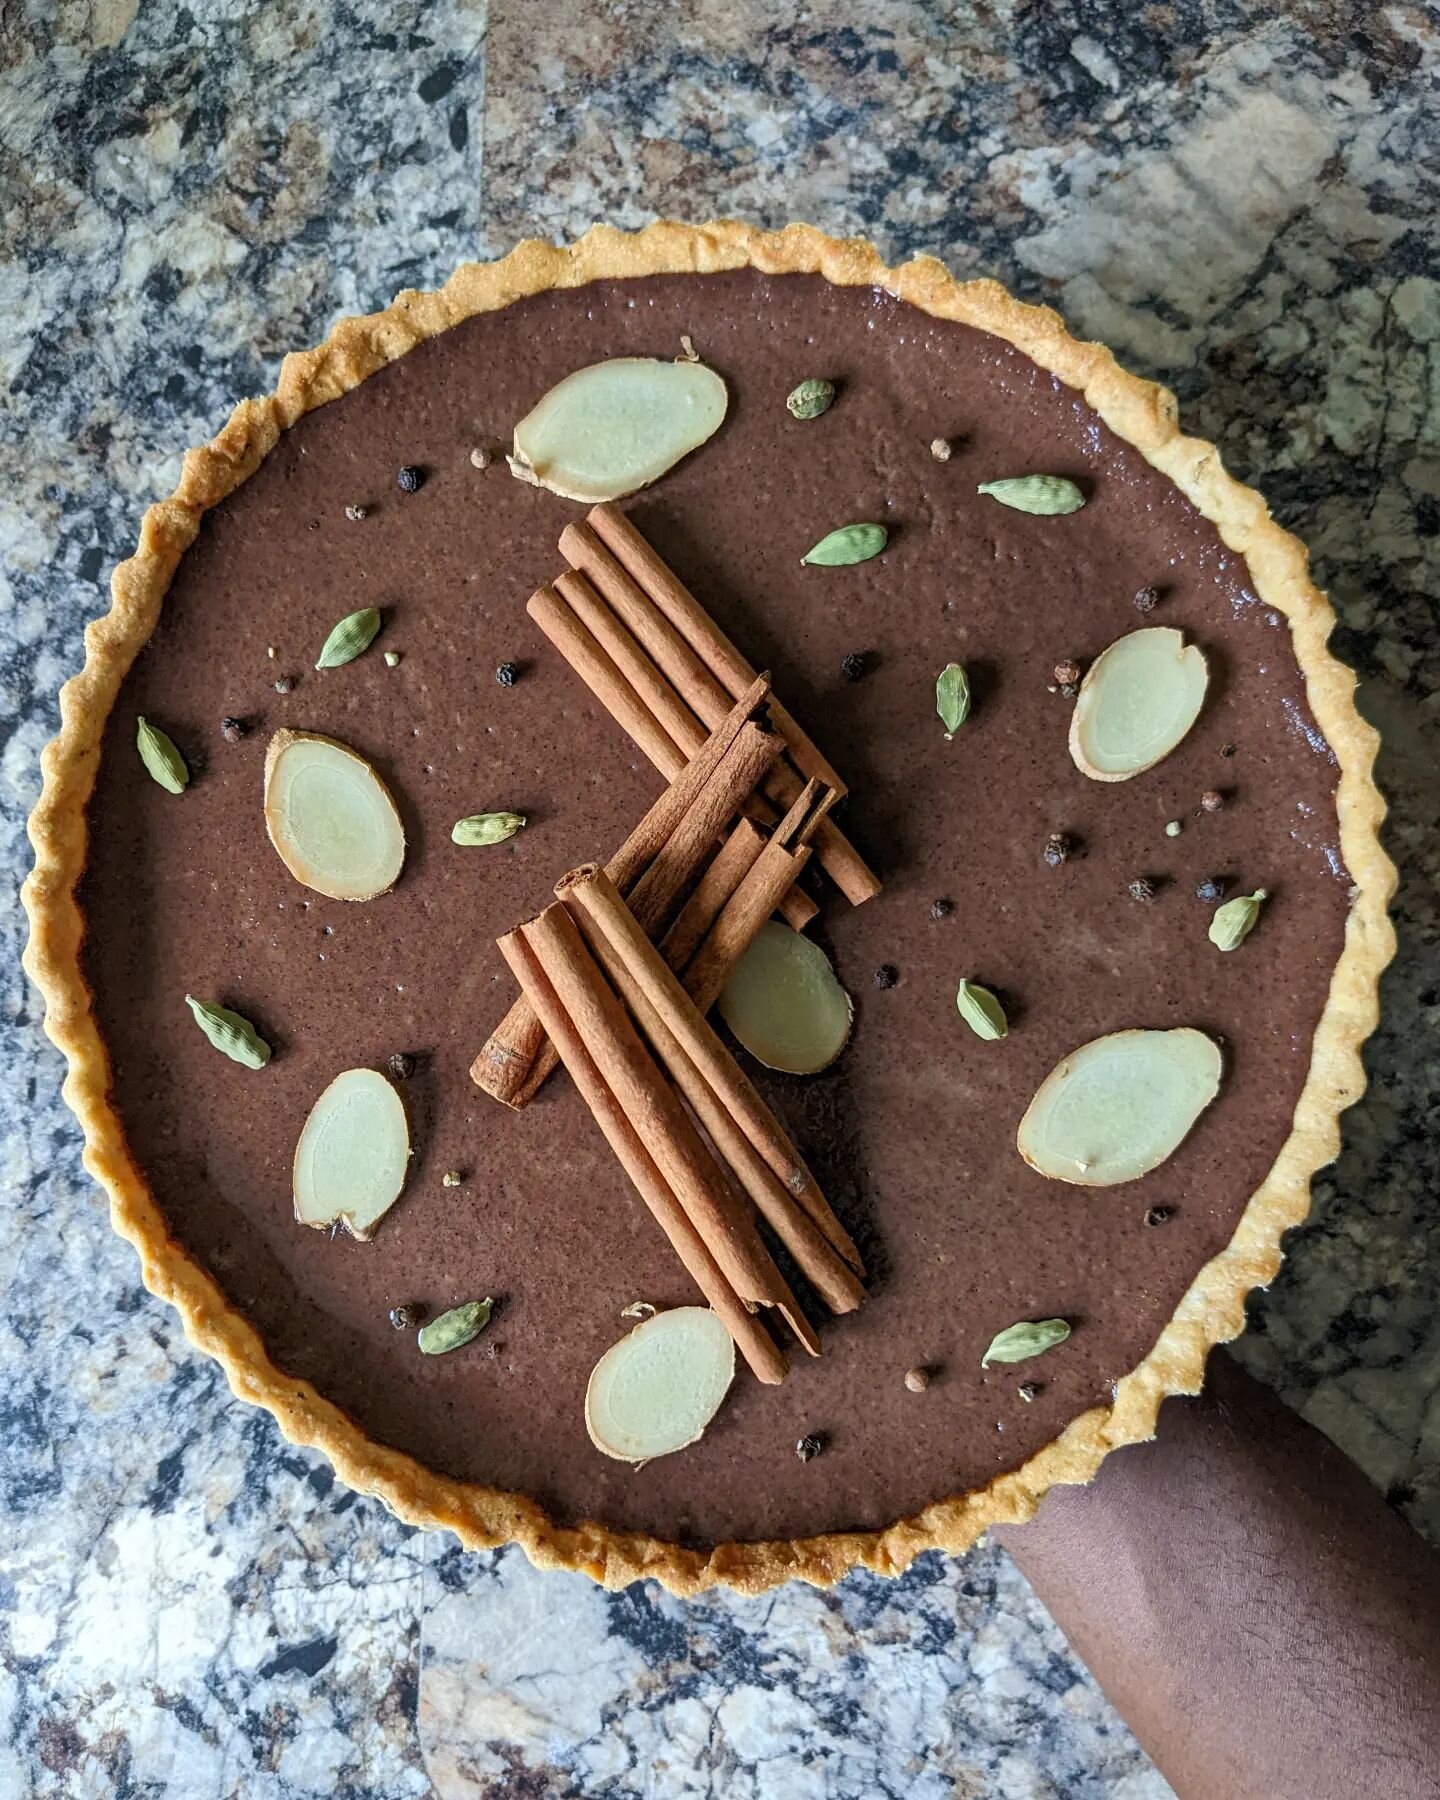 Picture this. You're at a birthday party back in February for the wonderful @drcarpineti and during that night after a couple glasses of wine, you and @elliotbaggott start talking about a chai latte concept tart.

A few weeks later you get a message 